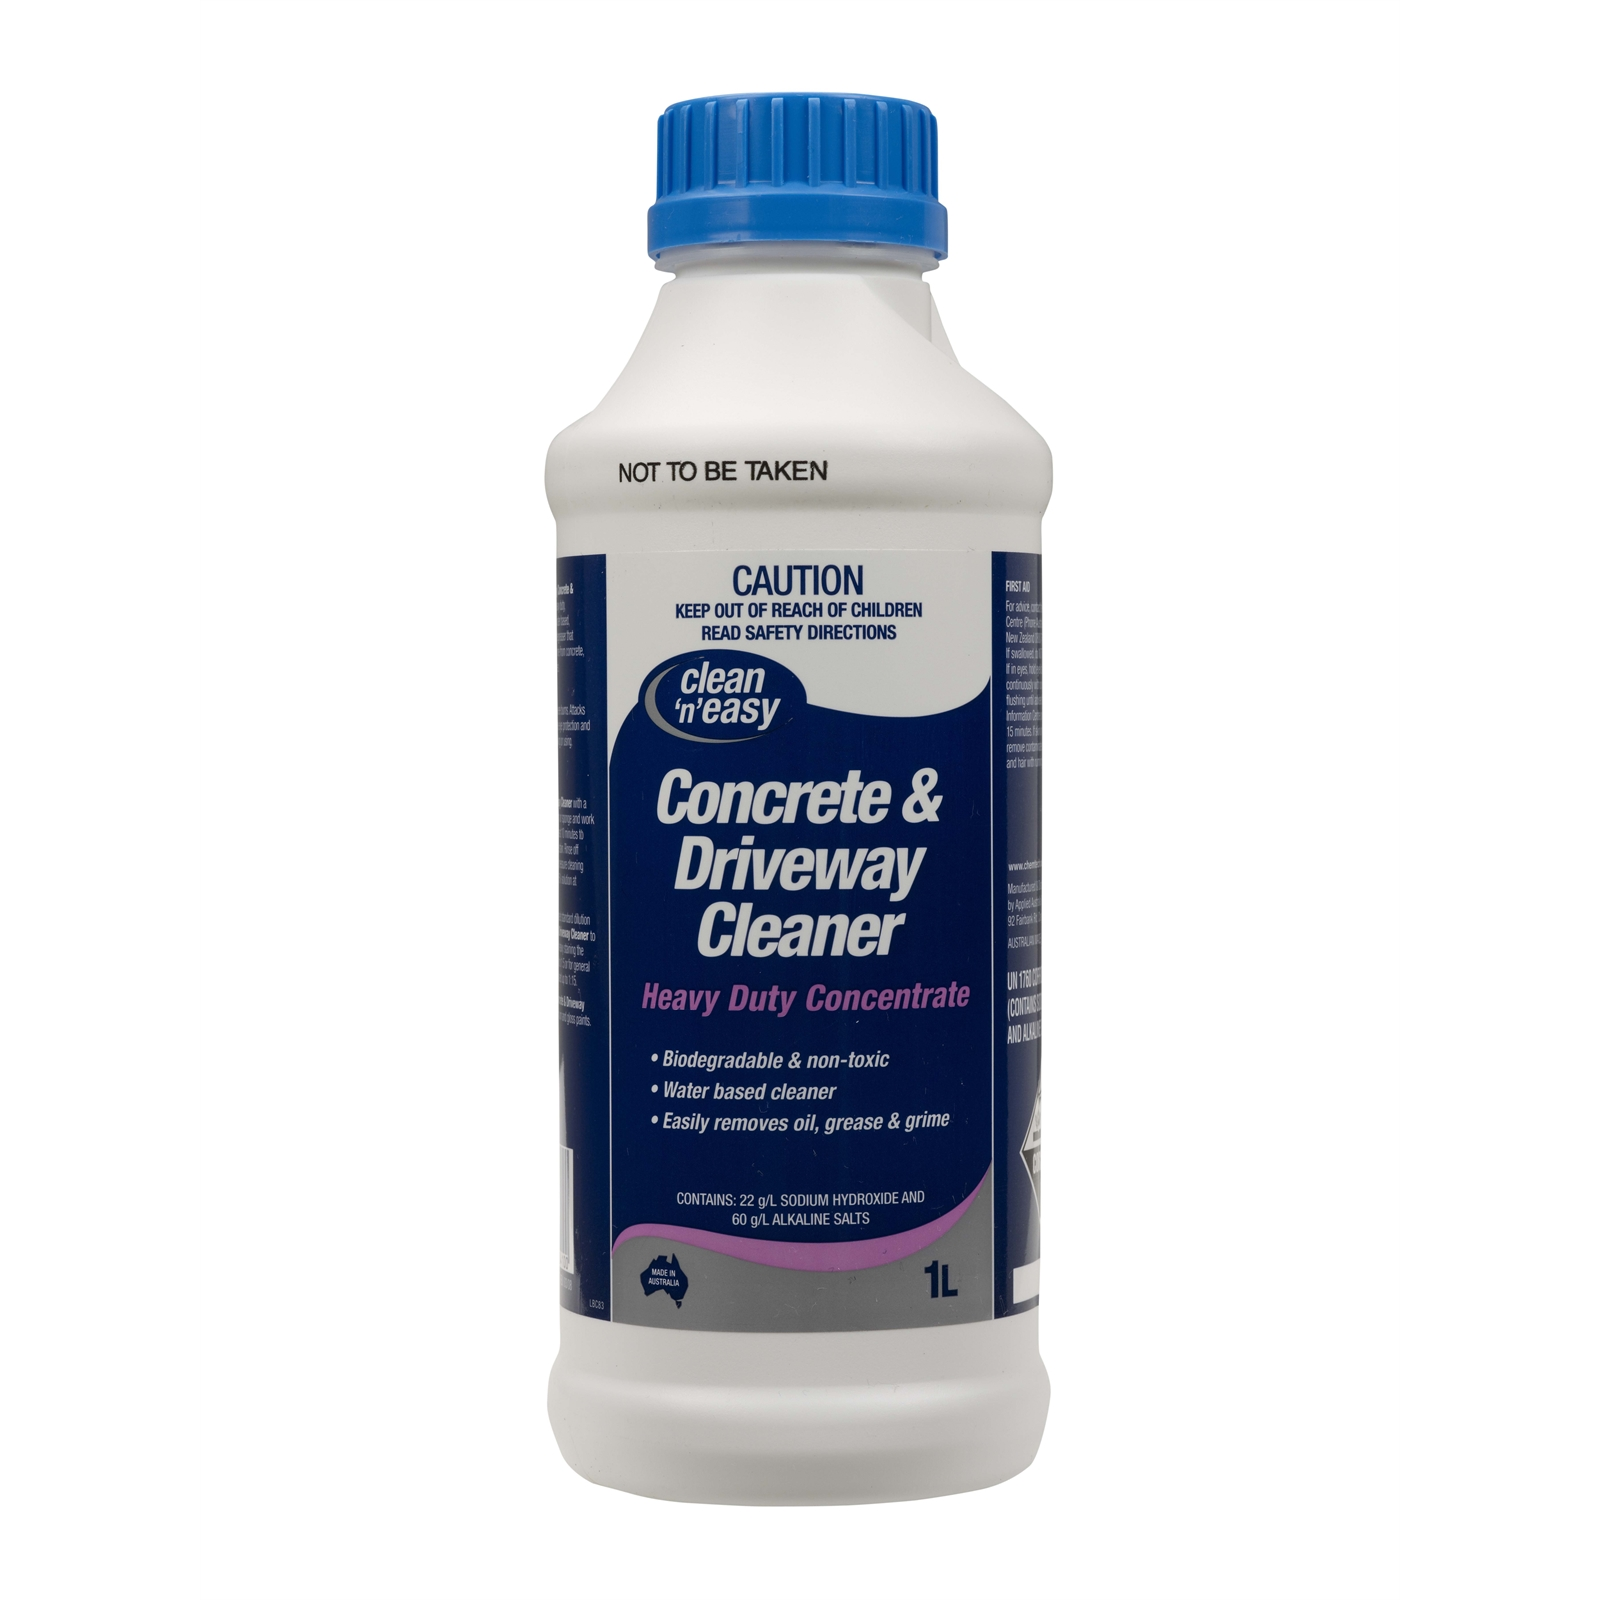 ChemTech Concrete & Driveway Cleaner